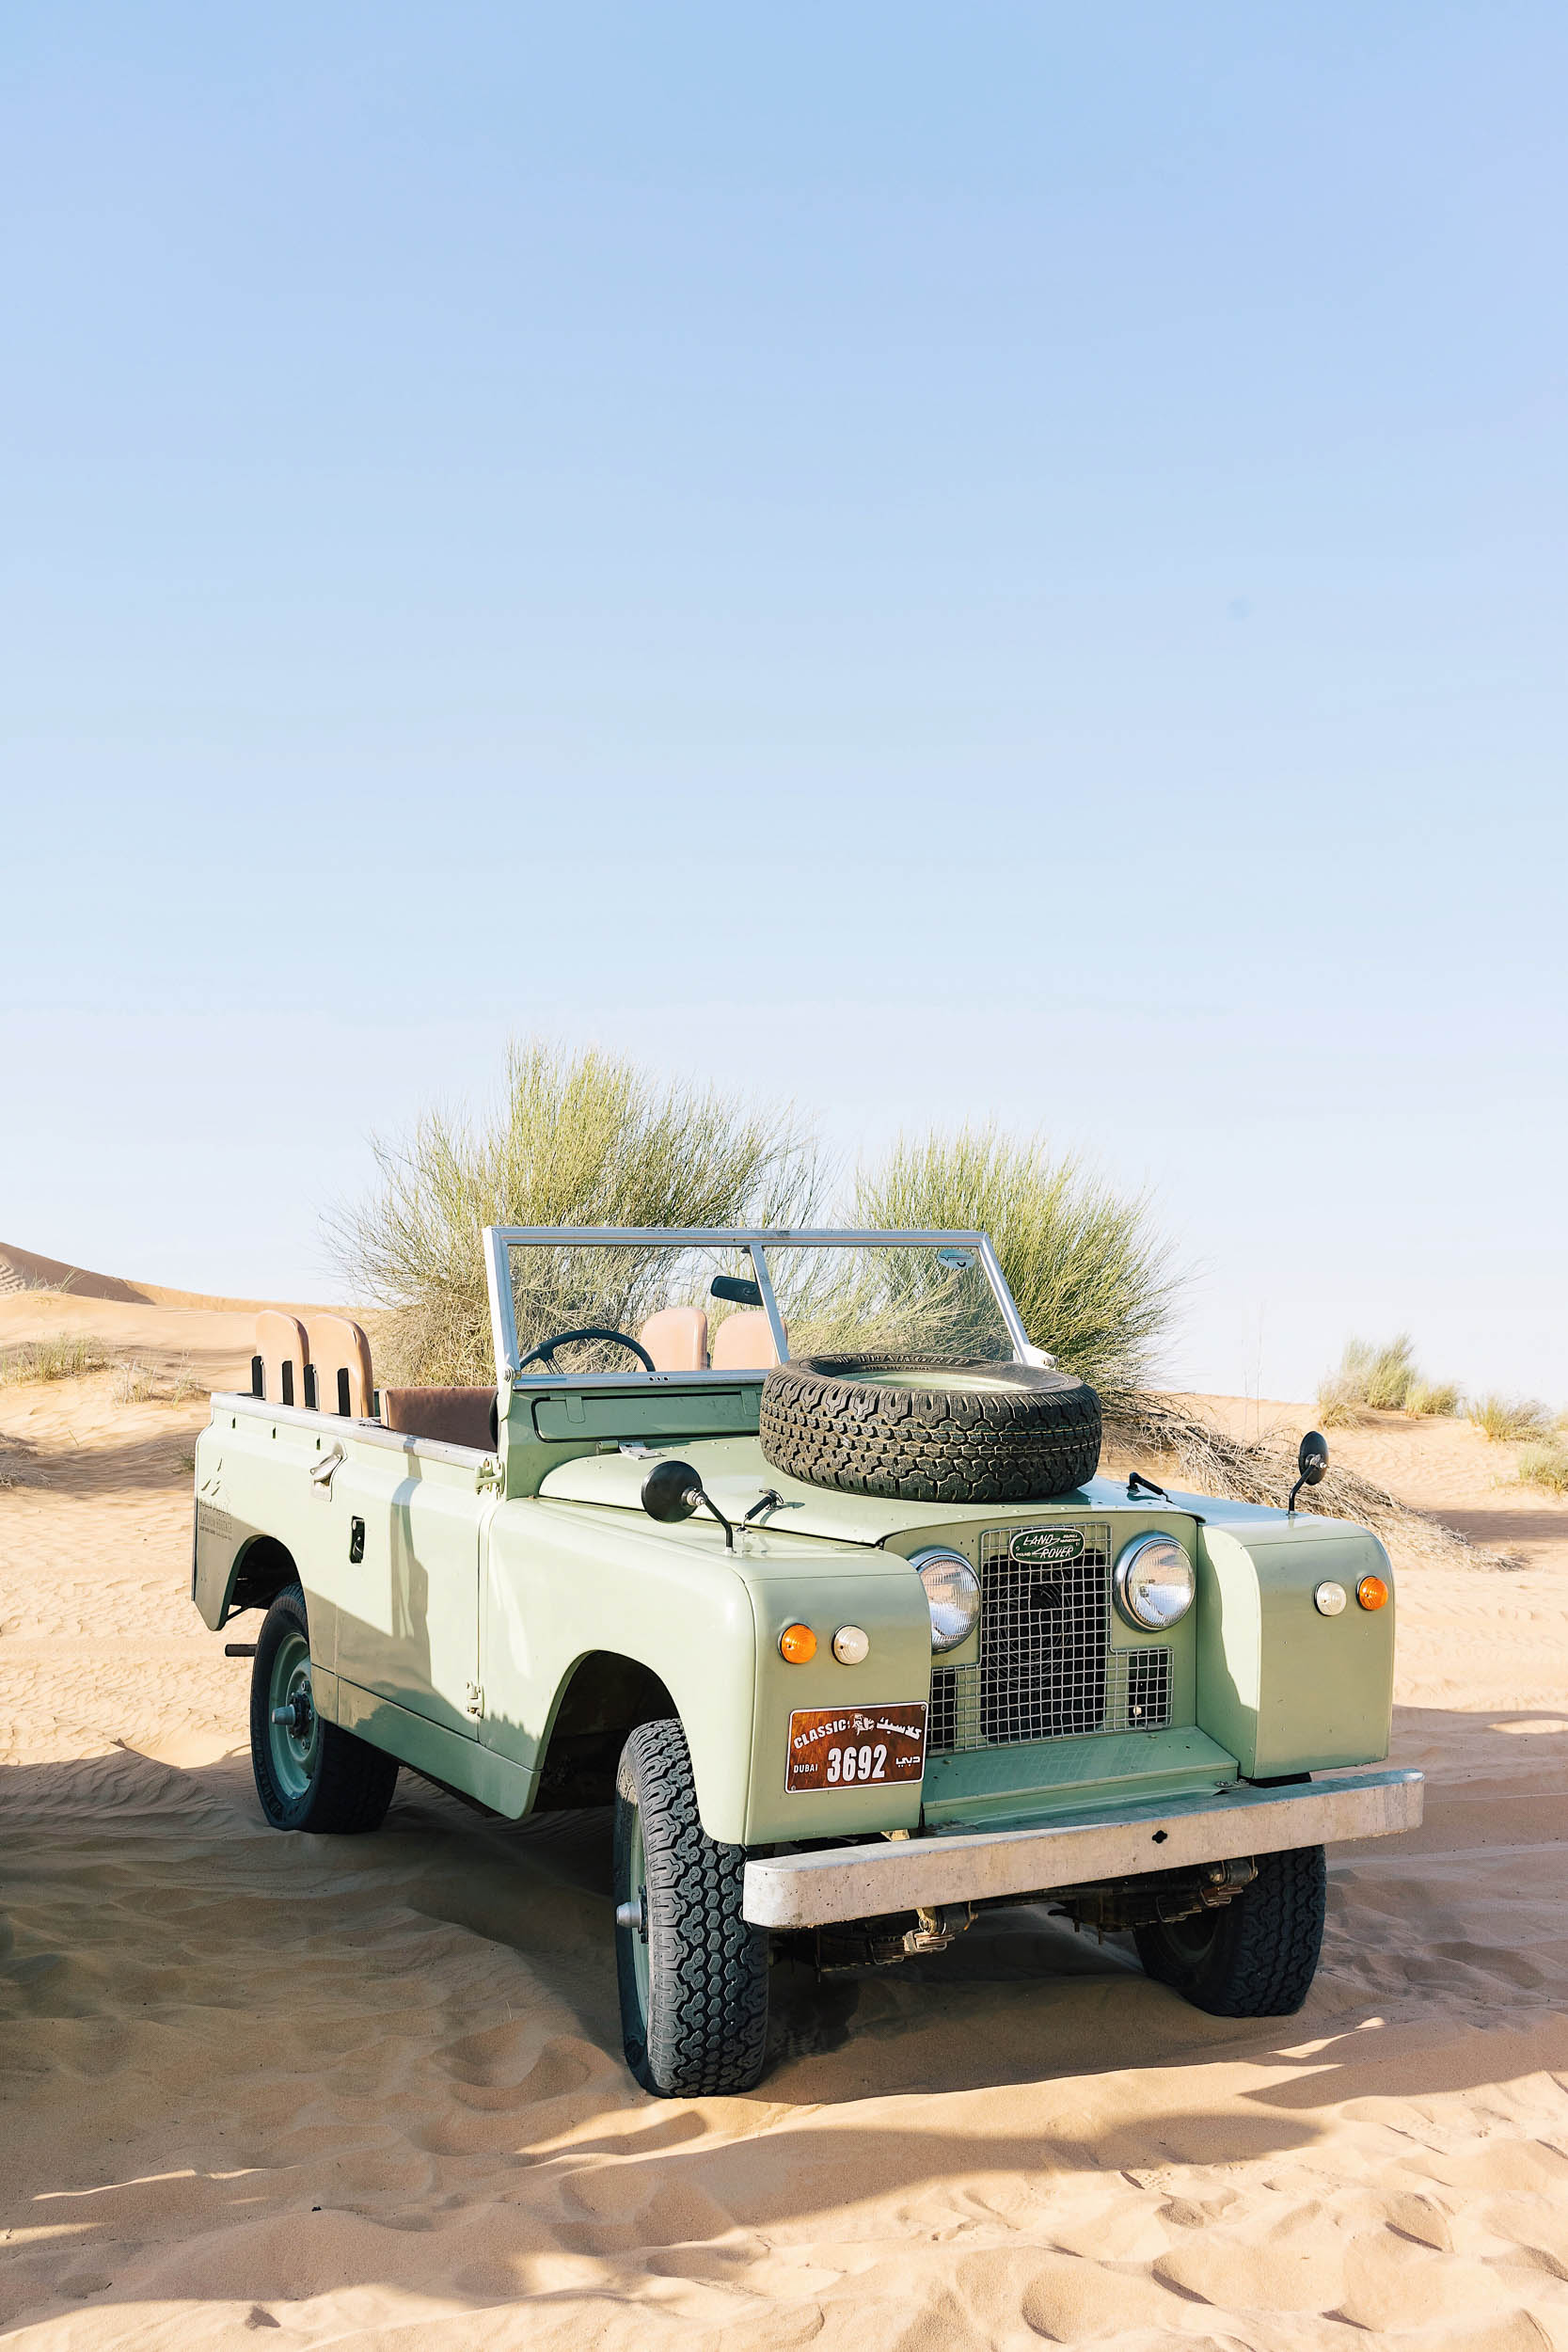 Platinum Heritage is the the world’s only safari to use 1950’s museum quality, vintage Land Rovers